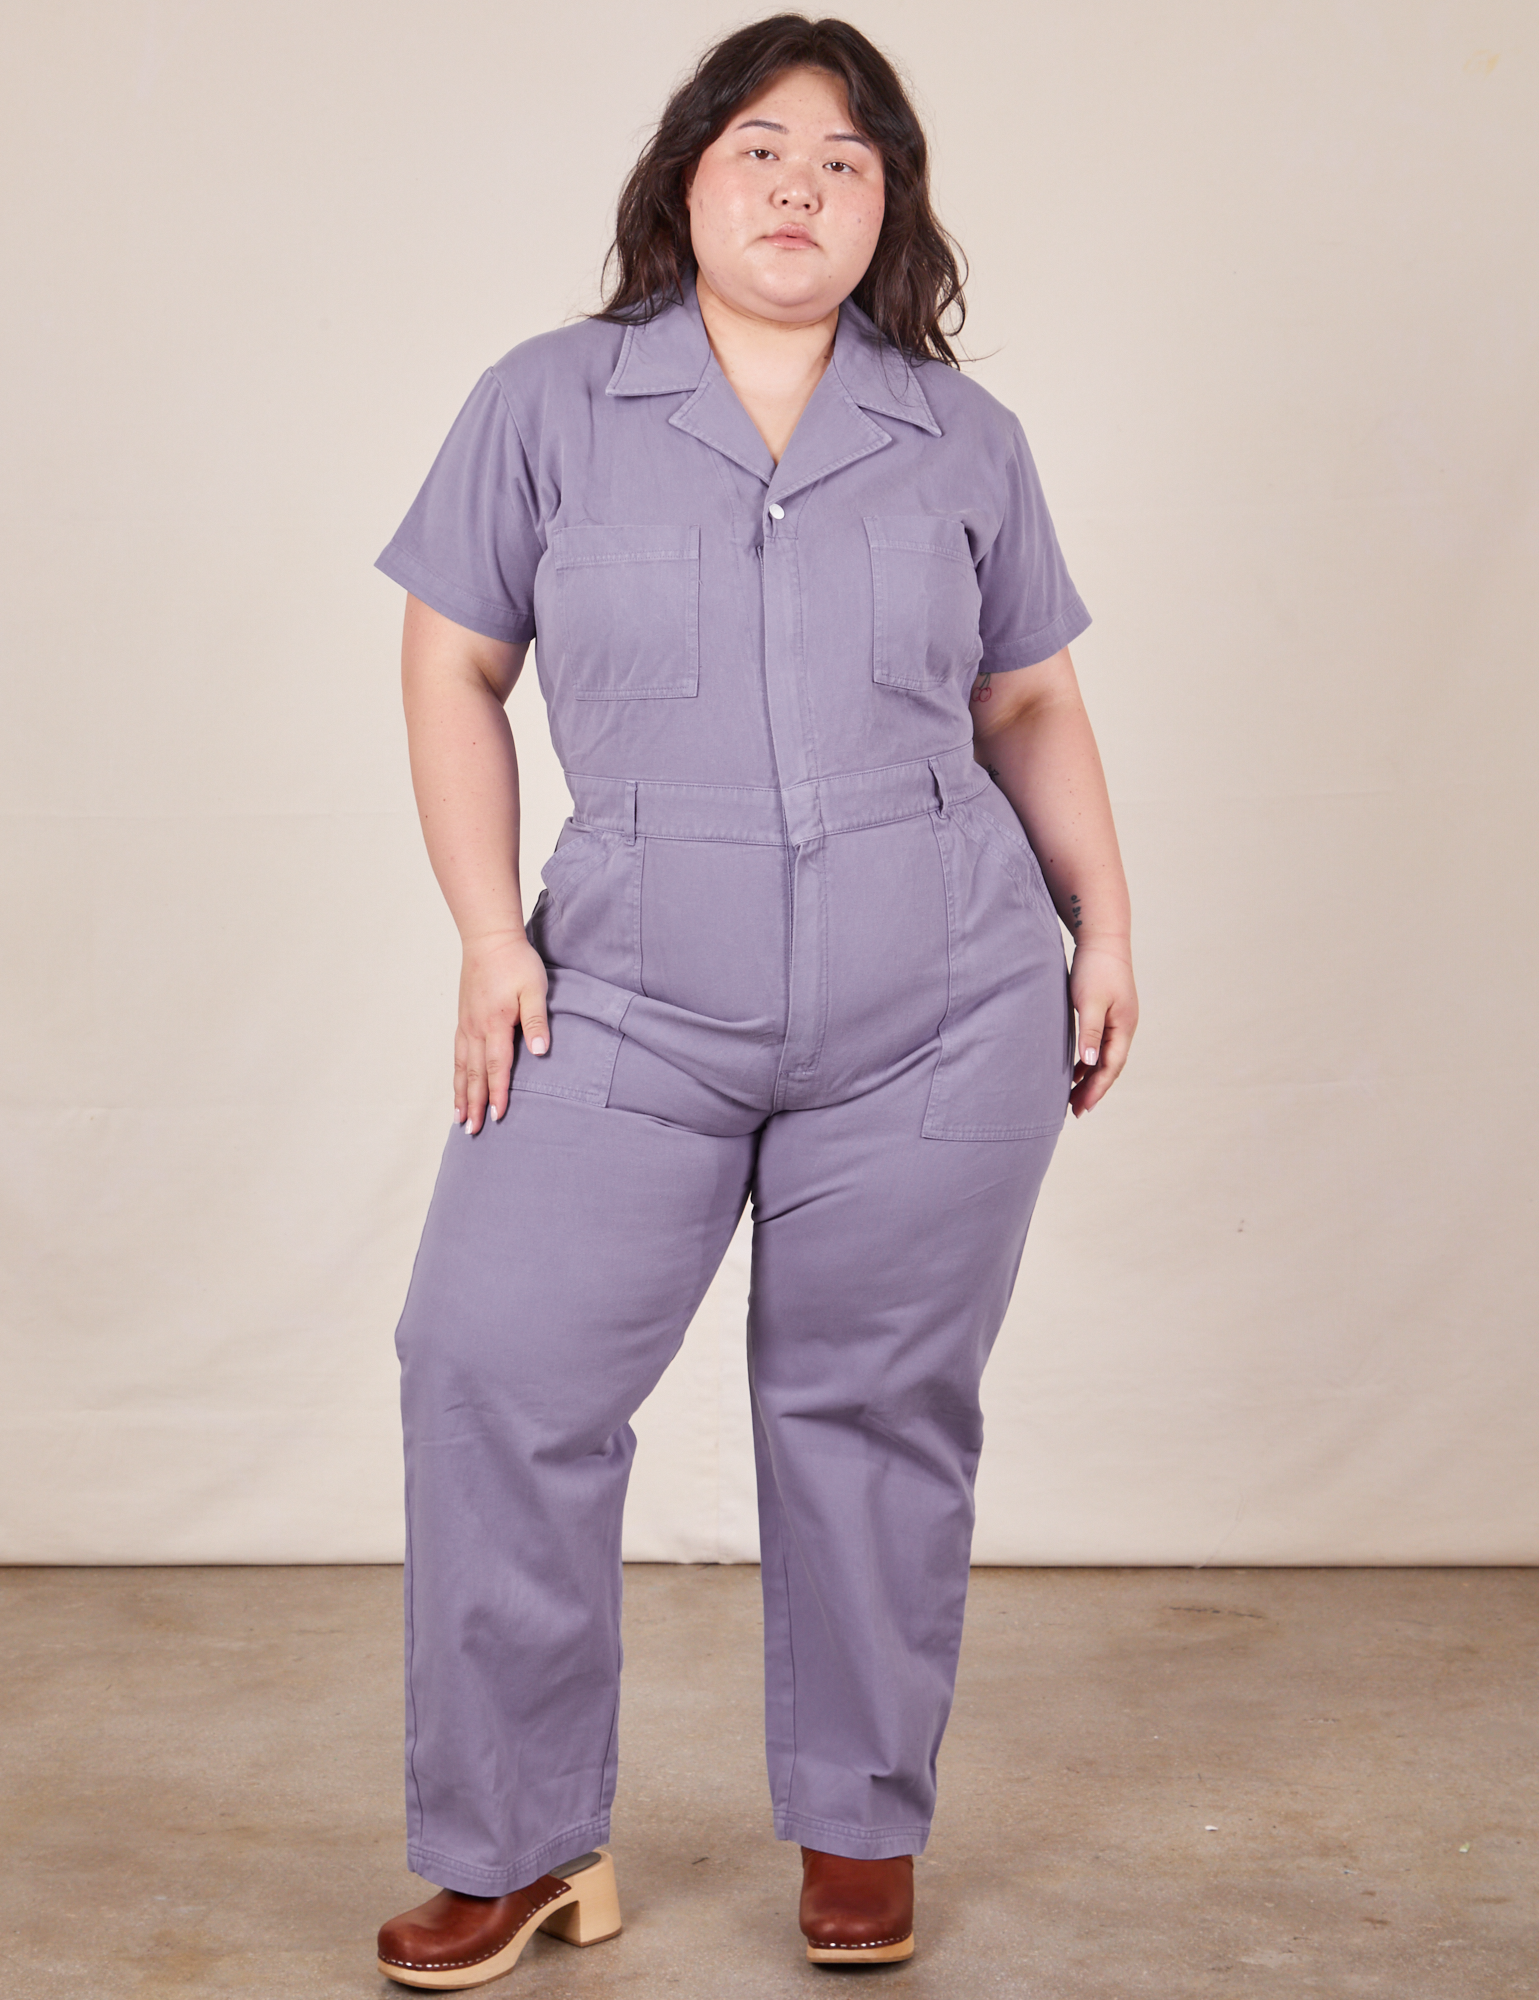 Ashley is 5'7" and wearing 1XL Short Sleeve Jumpsuit in Faded Grape